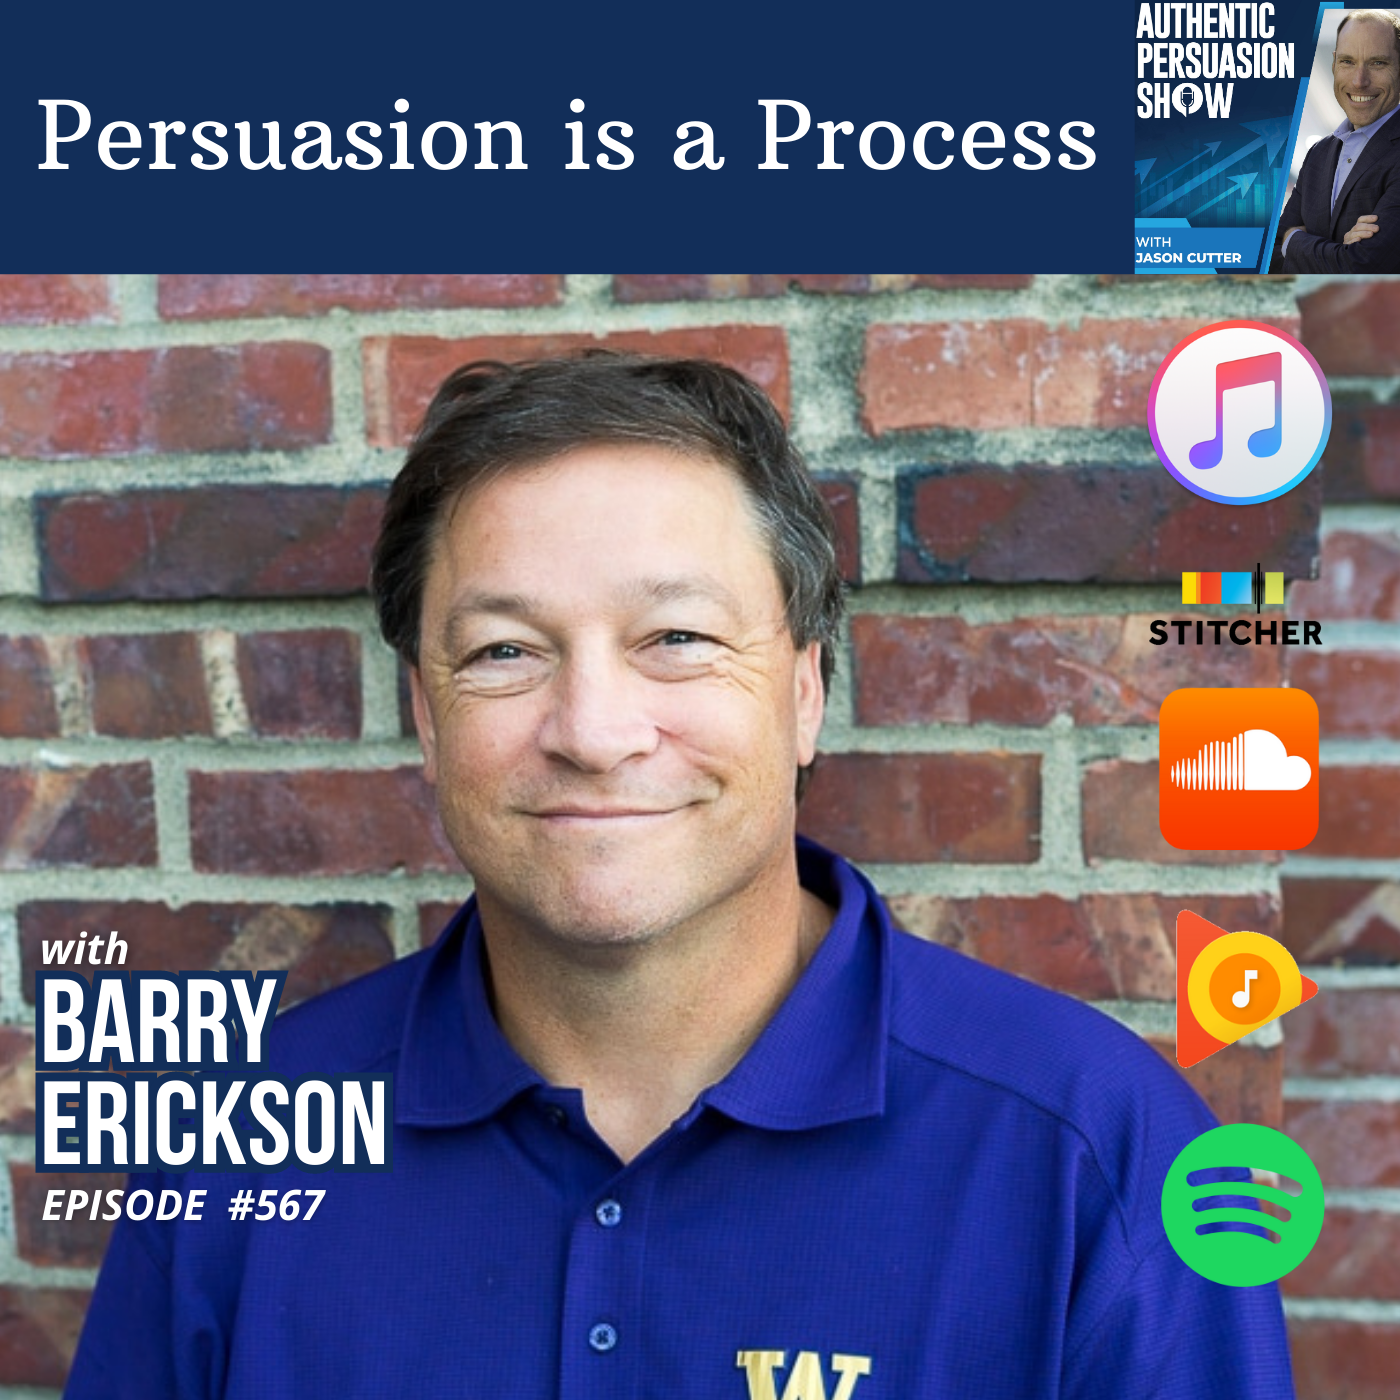 [567] Persuasion is a Process, with Barry Erickson from UW